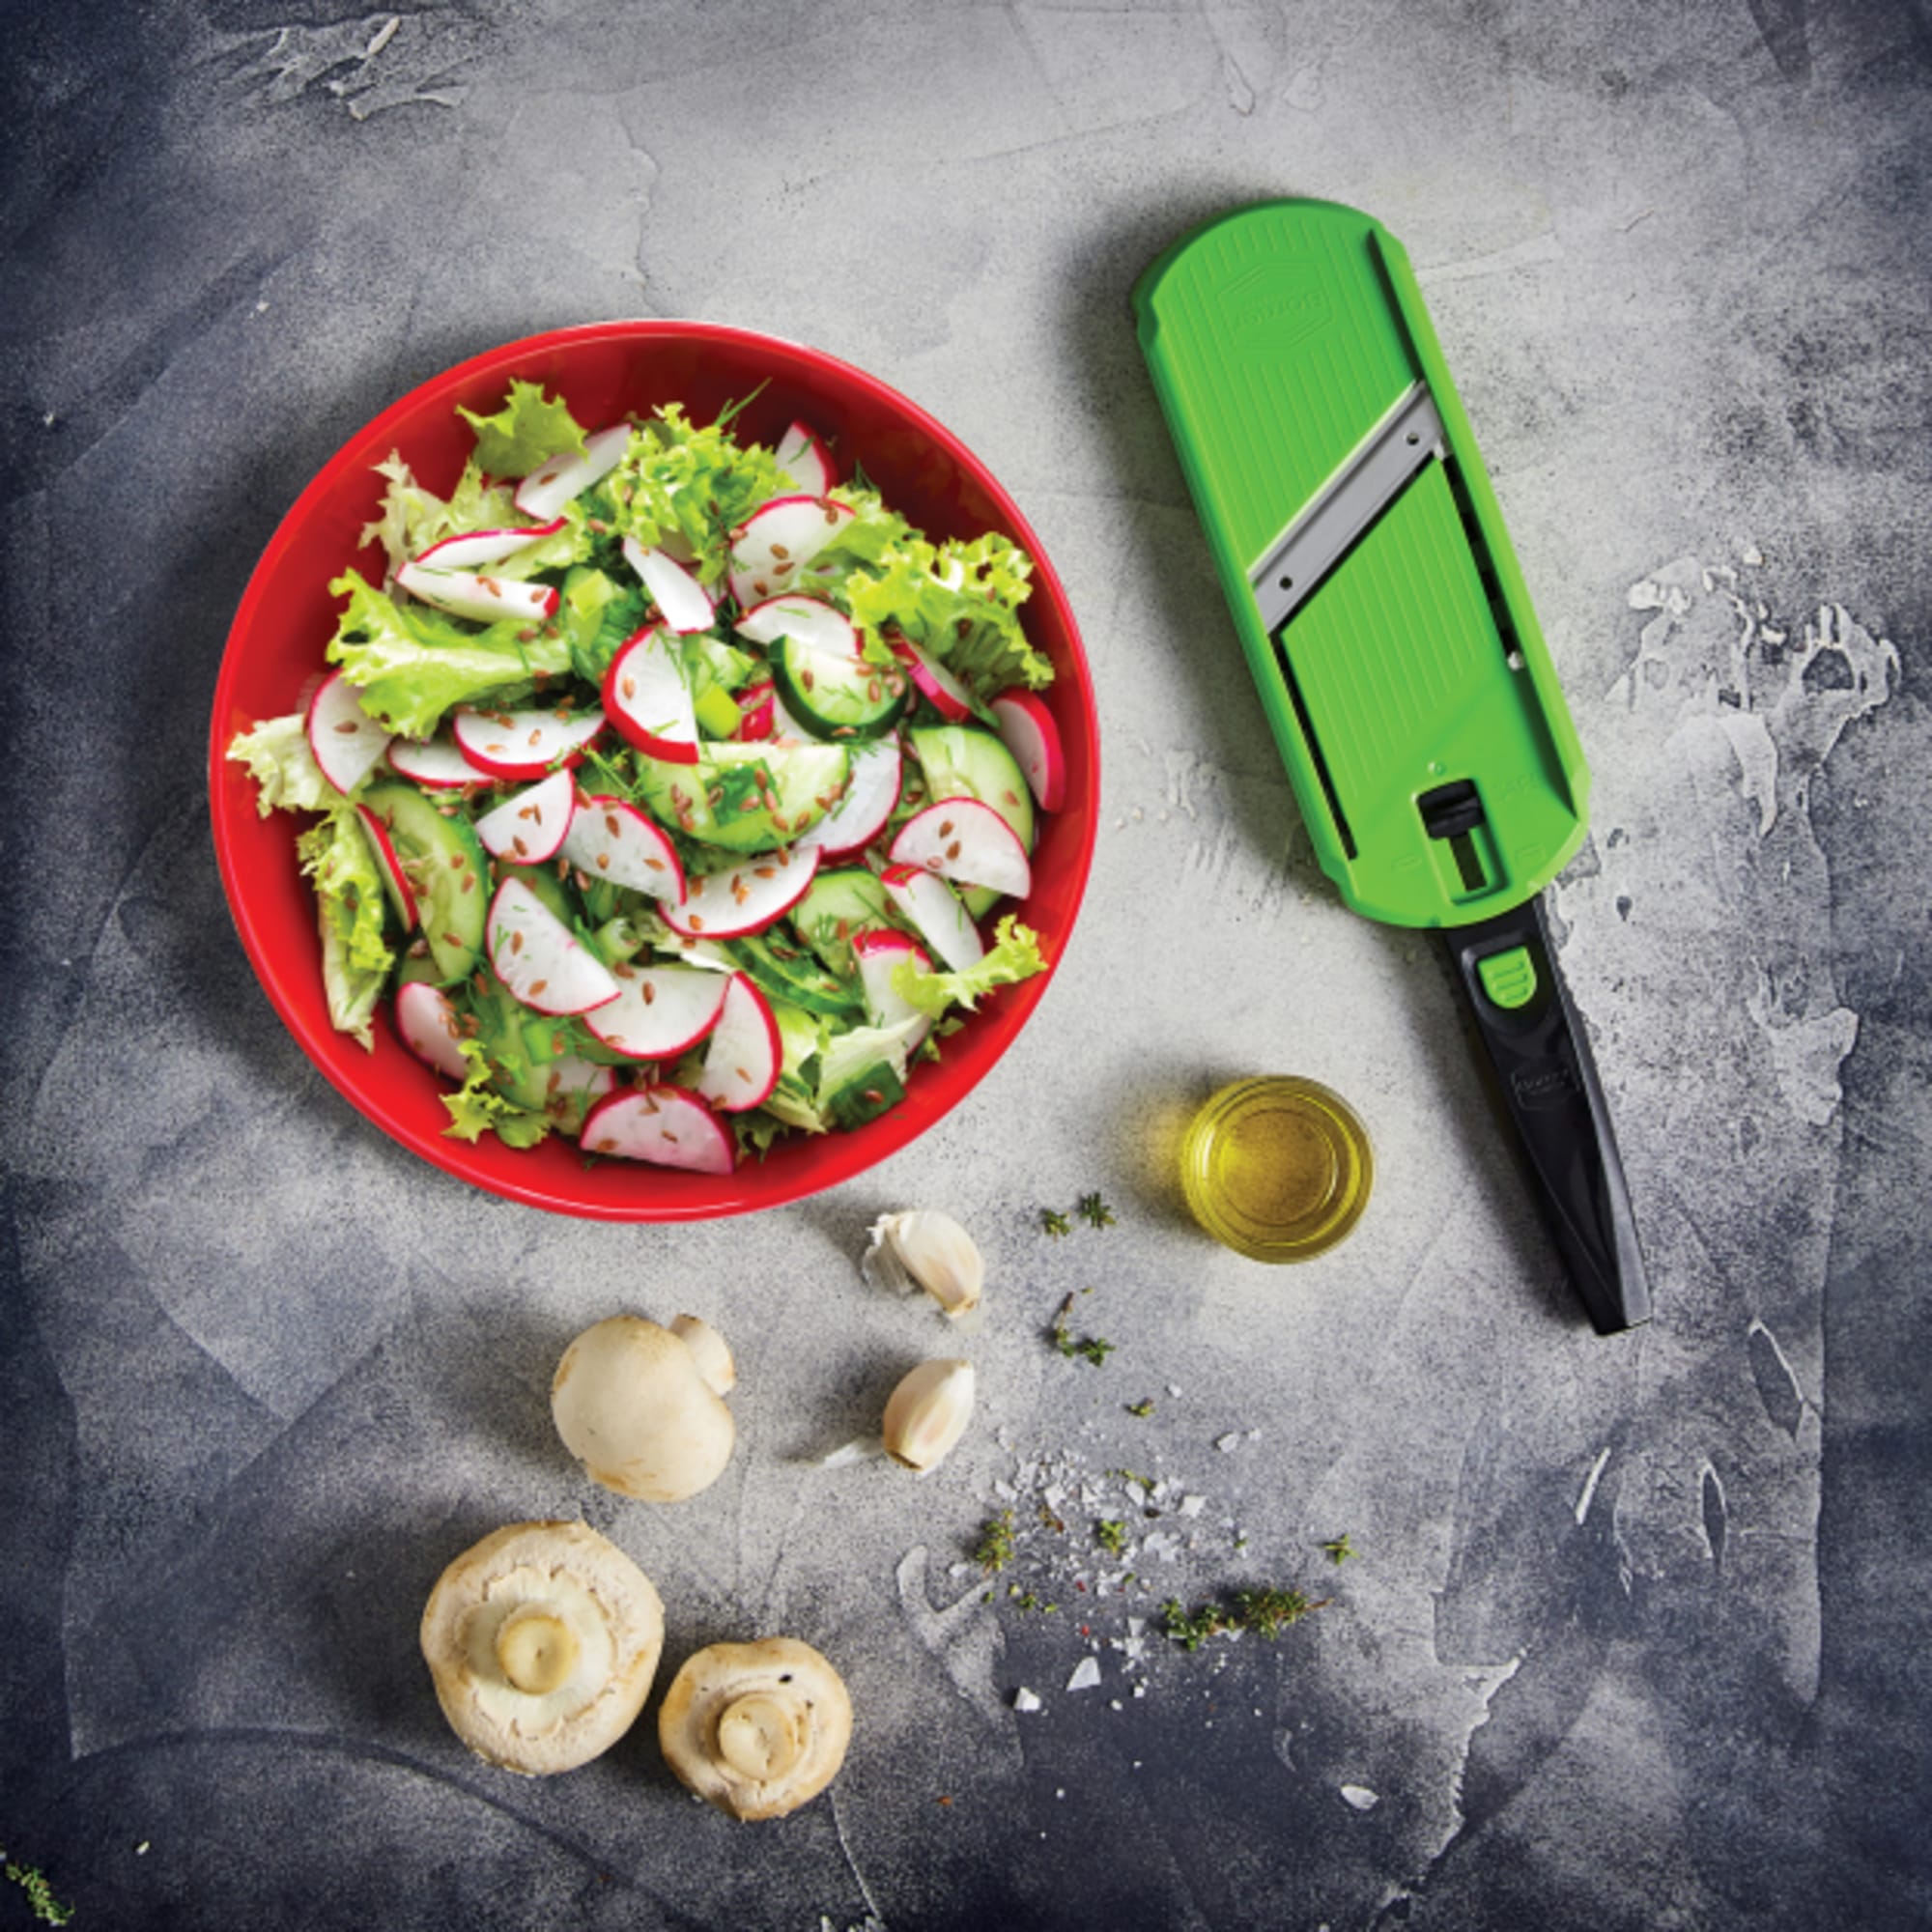 https://res.cloudinary.com/kitchenwarehouse/image/upload/c_fill,g_face,w_625/f_auto/t_PDP_2000x2000/Supplier%20Images%20/2000px/Borner-Multi-Slicer-Green-with-Multi-Grip-and-Safety-Food-Holder_2_2000px.jpg